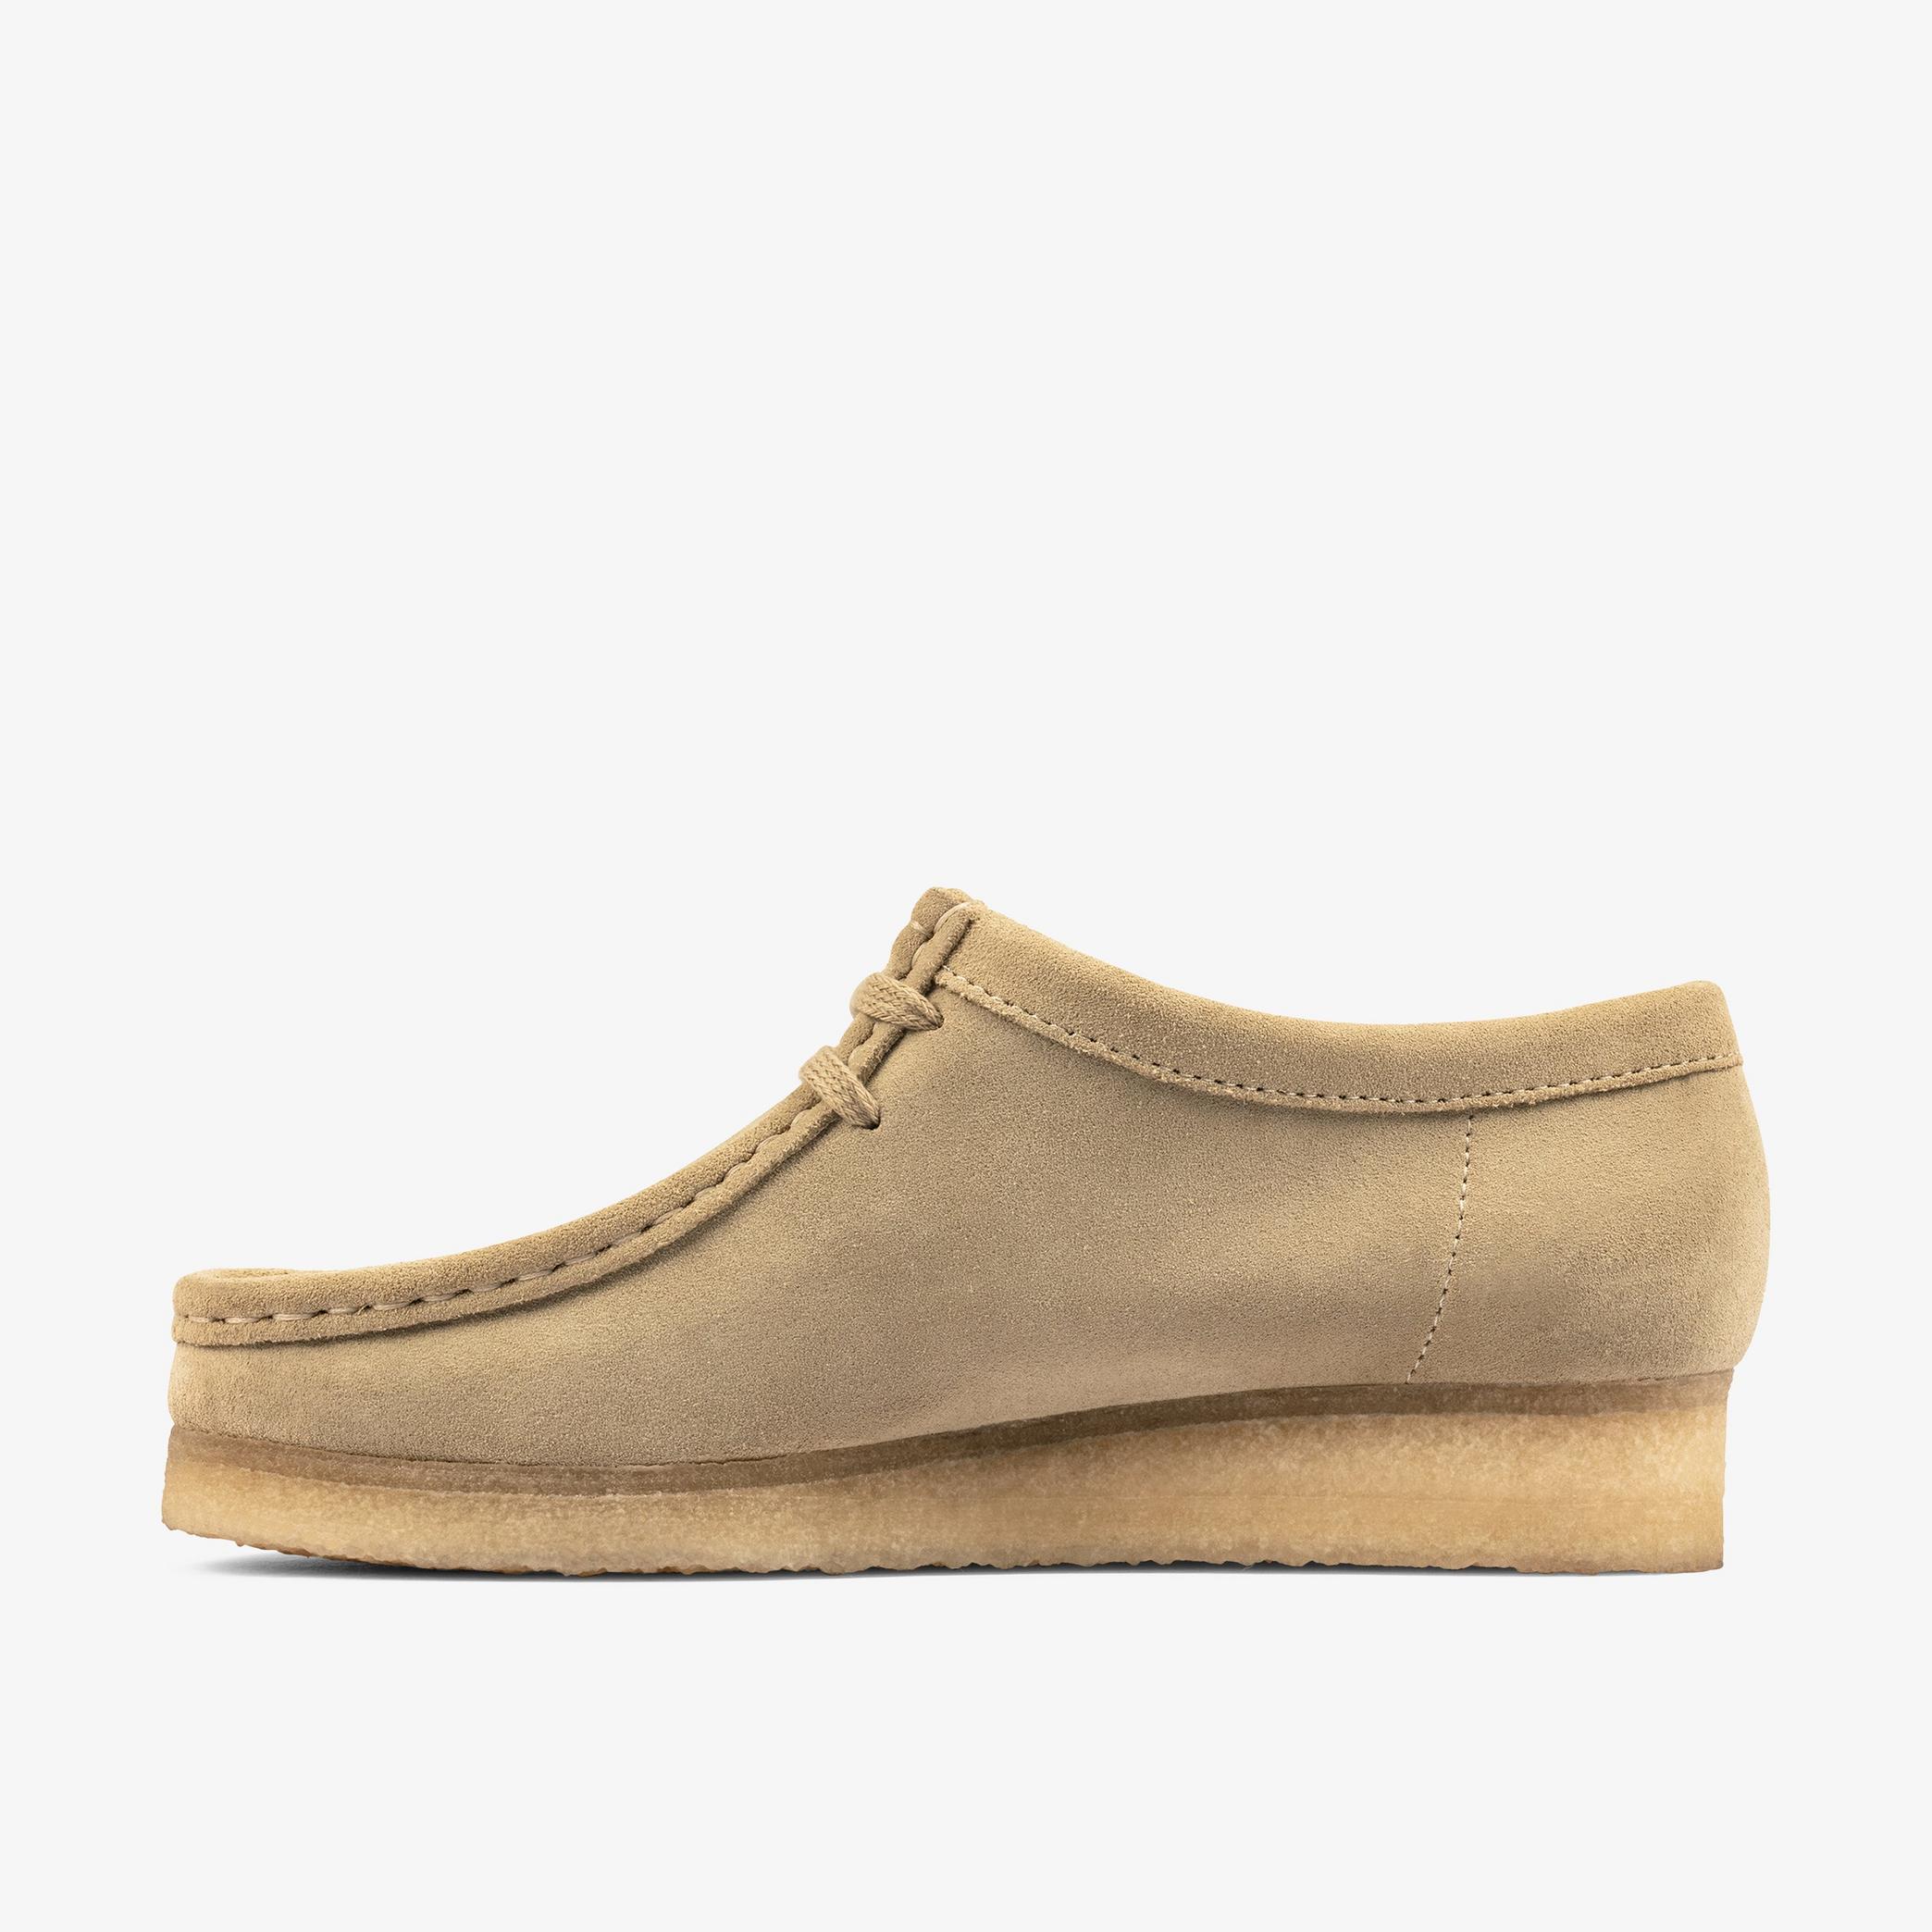 Wallabee Maple Suede Shoes, view 2 of 6